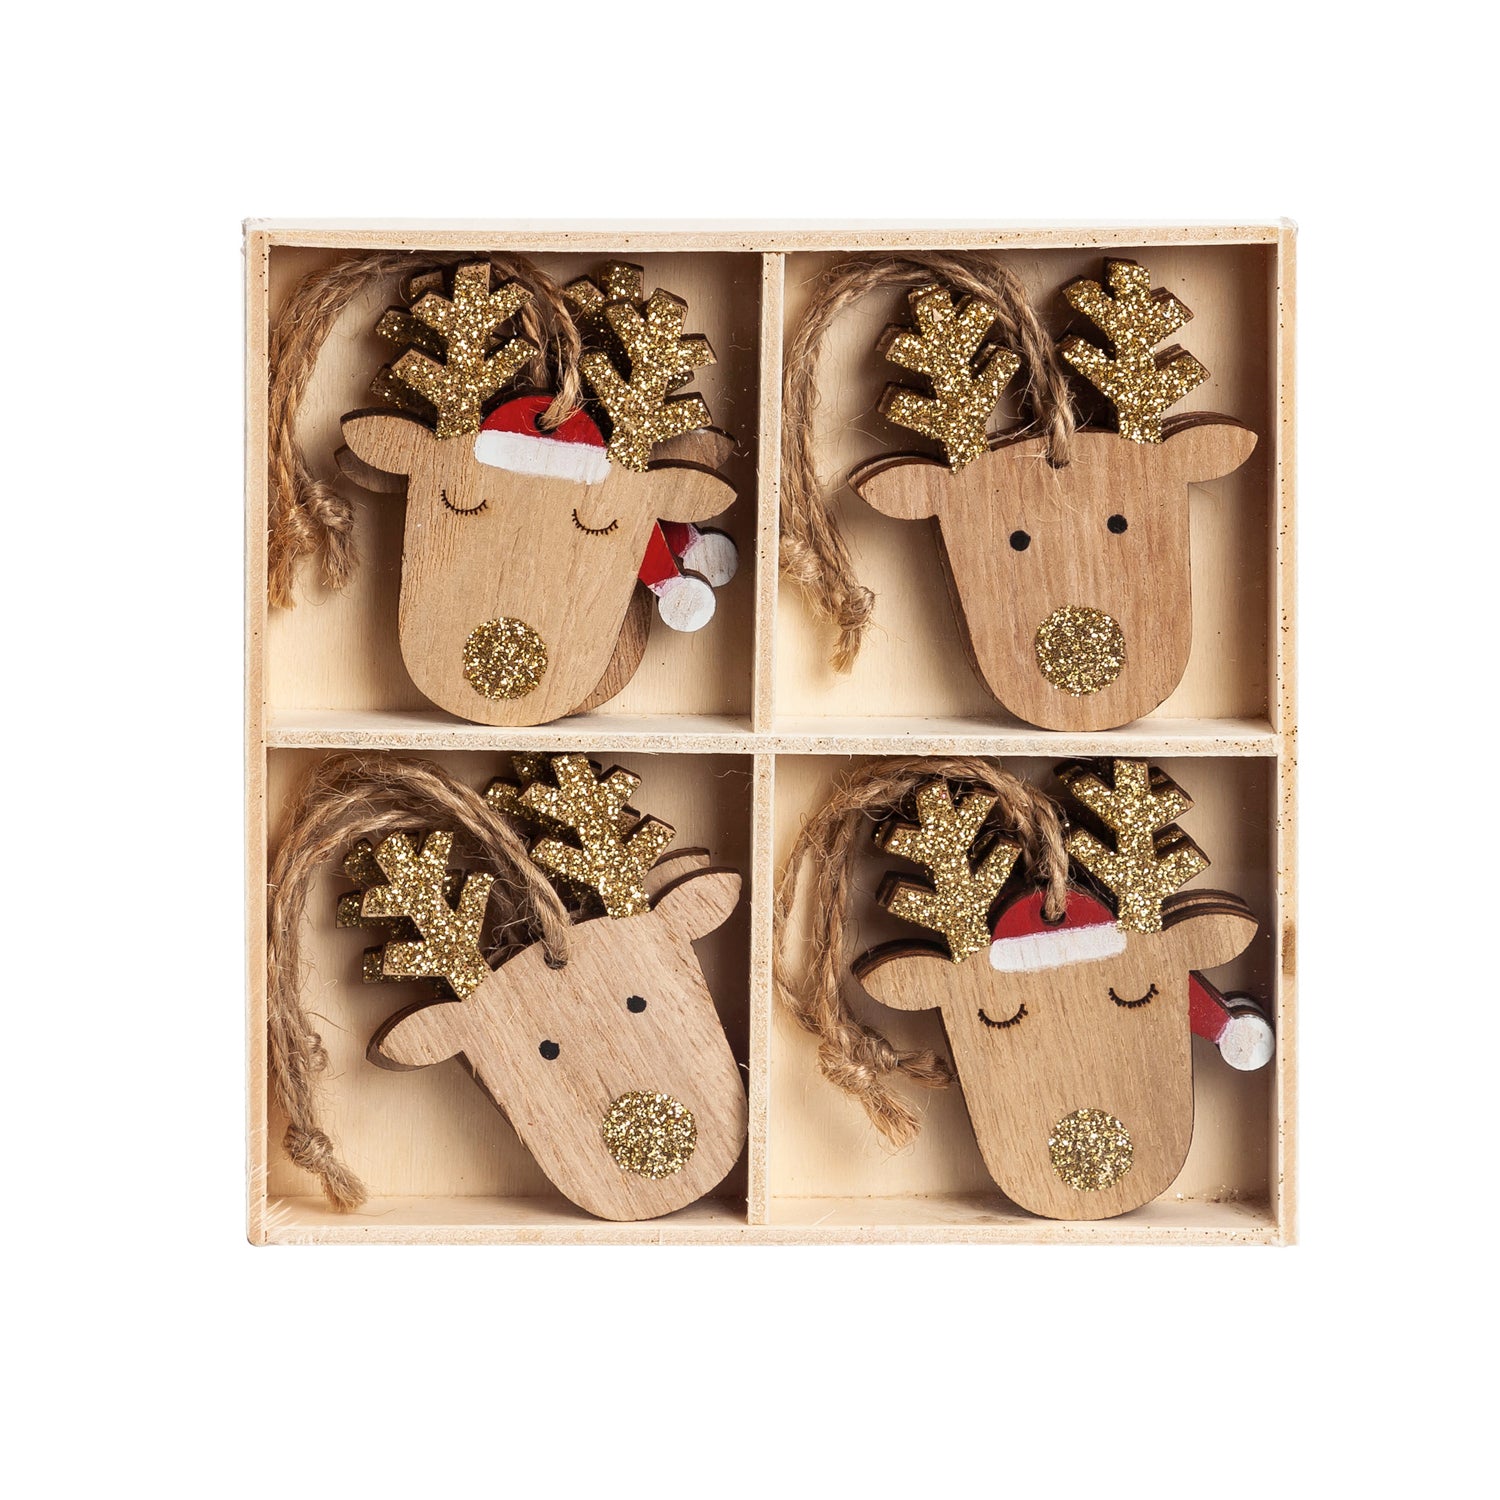 Wooden Holiday Deer Ornament in Wooden Tray 8 pcs